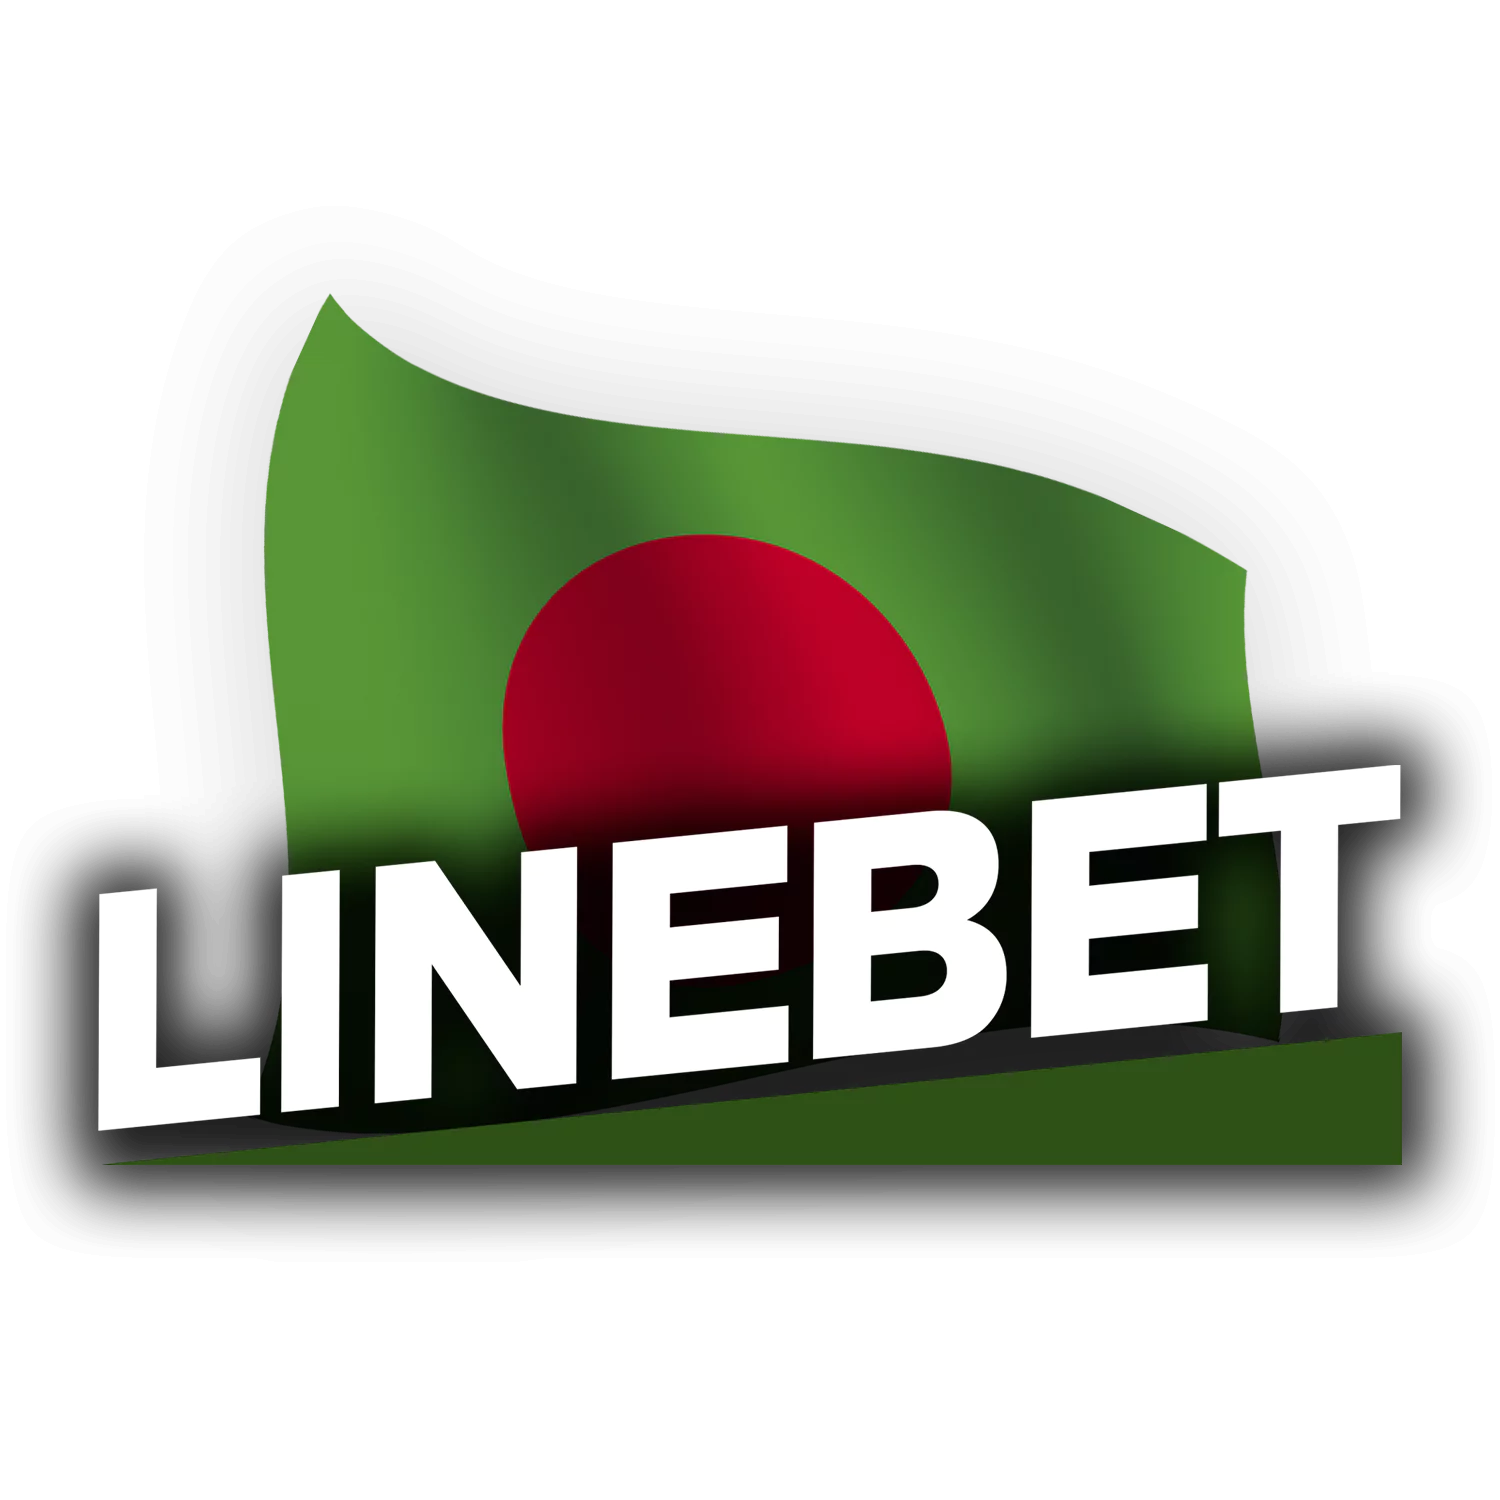 Linebet operates legally in Bangladesh.